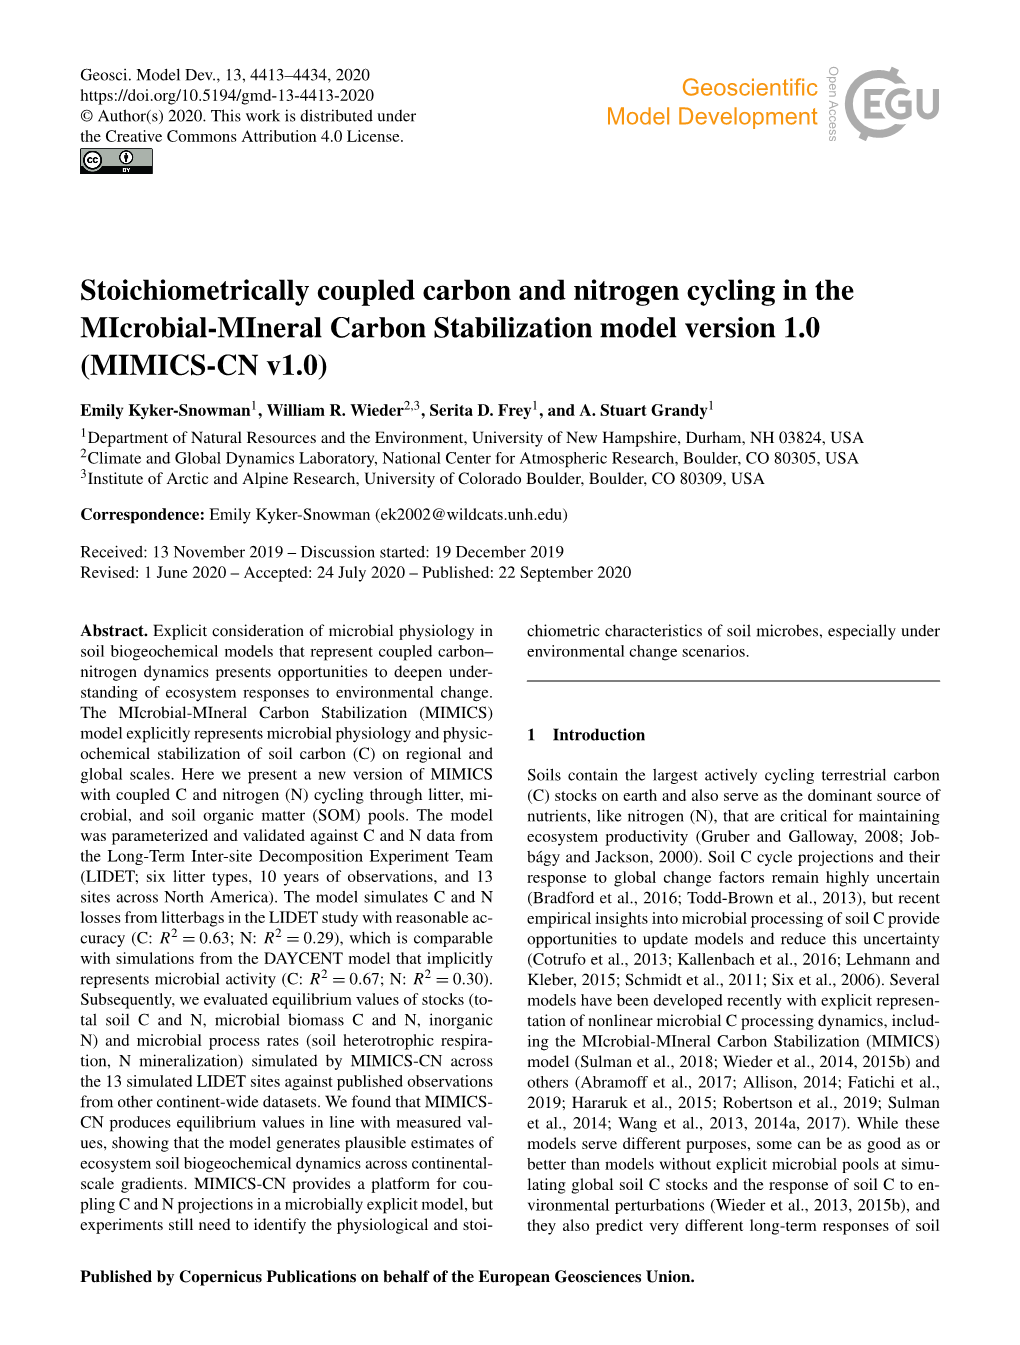 Stoichiometrically Coupled Carbon and Nitrogen Cycling in the Microbial-Mineral Carbon Stabilization Model Version 1.0 (MIMICS-CN V1.0)